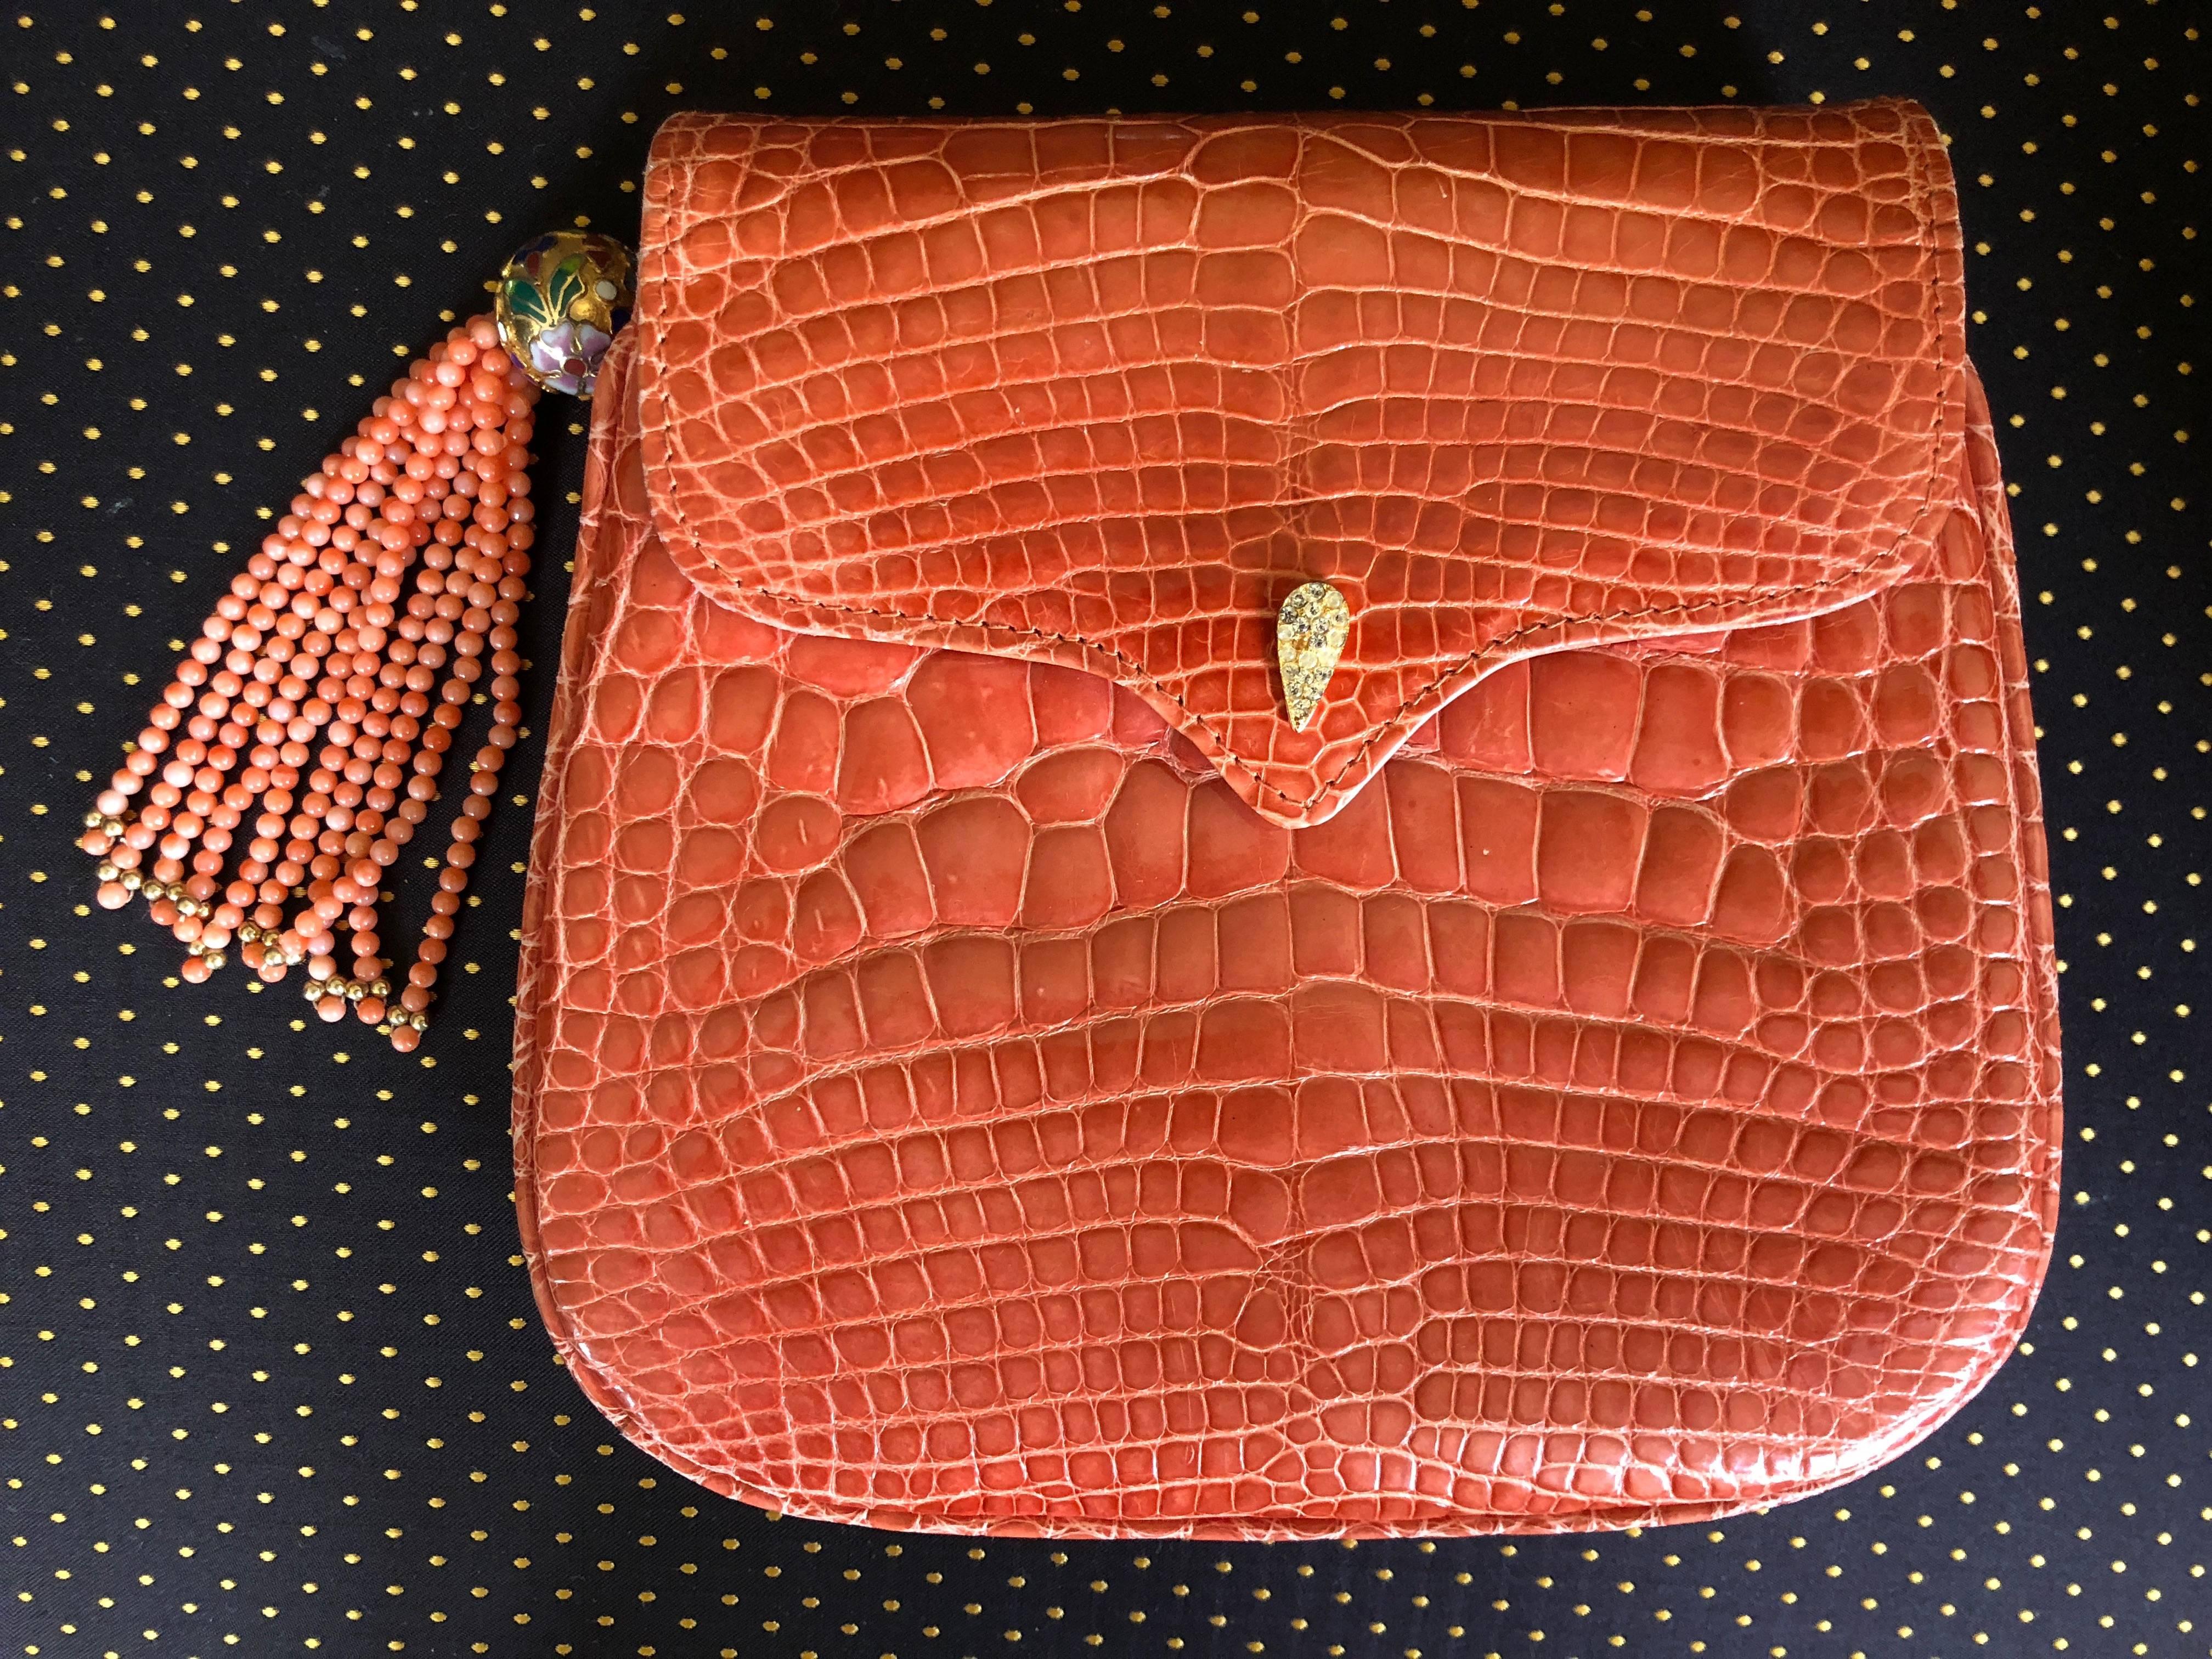  Lana of London Exquisite Orange Crocodile Evening Bag with Coral Bead Strap In Excellent Condition For Sale In Cloverdale, CA